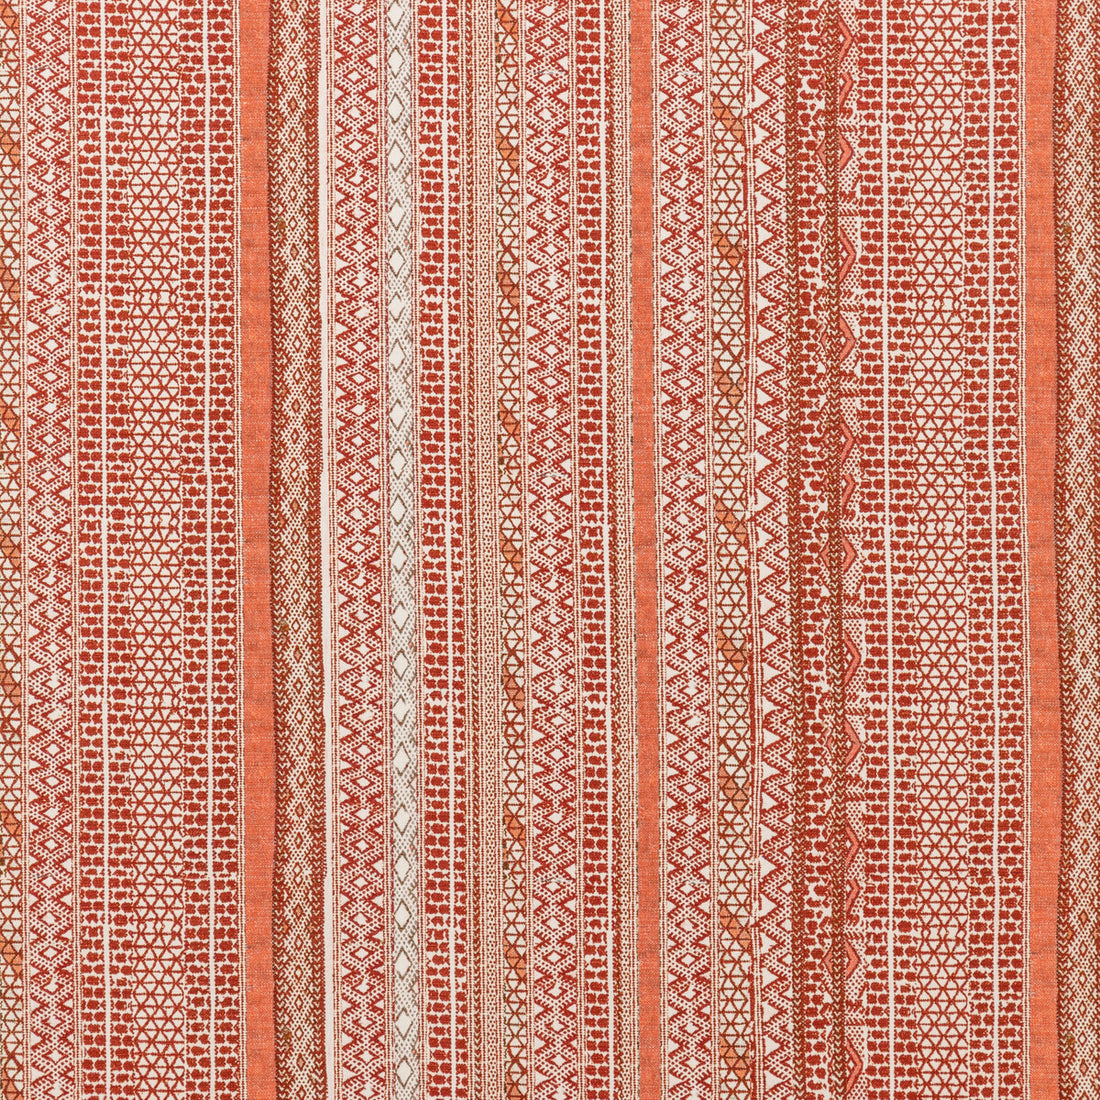 Hakan fabric in paprika color - pattern 2012100.24.0 - by Lee Jofa in the Breckenridge collection